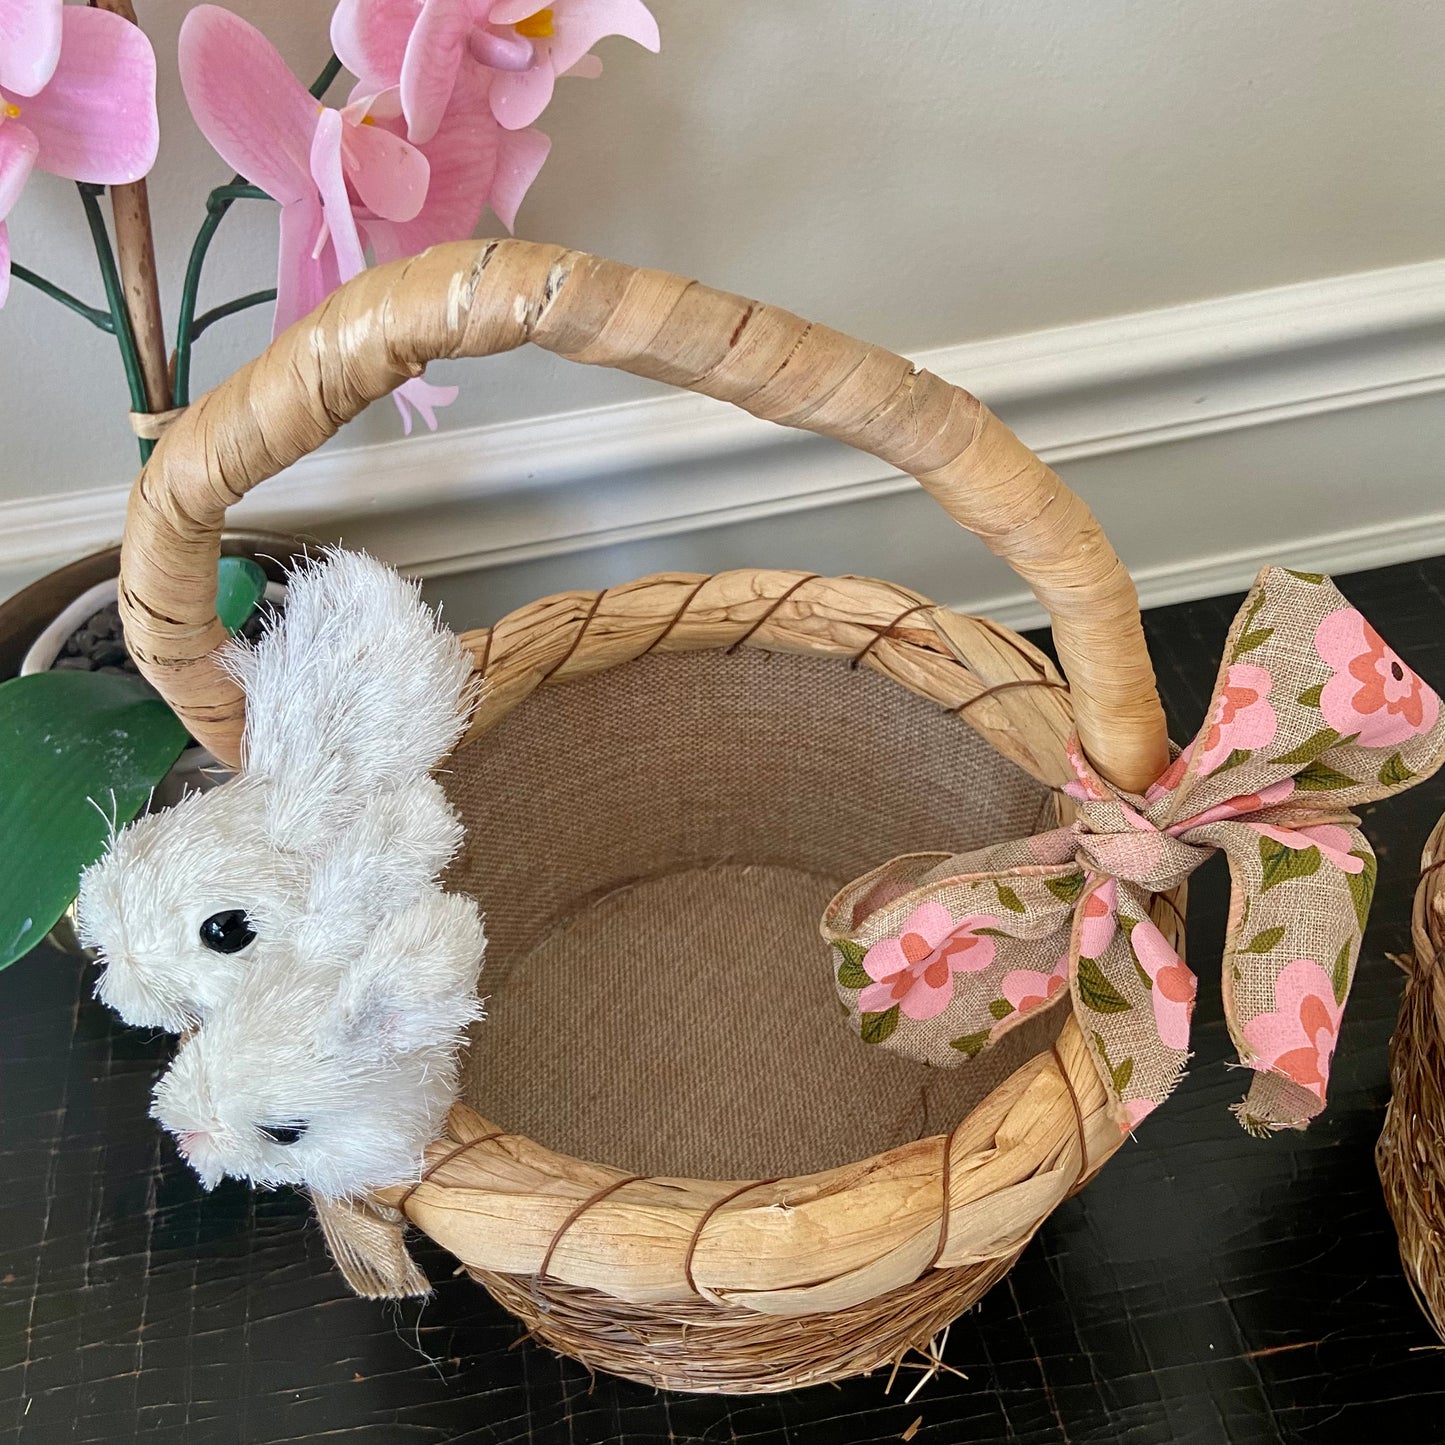 Set of 2 vintage rattan woven Easter baskets with bunny rabbits and bows.